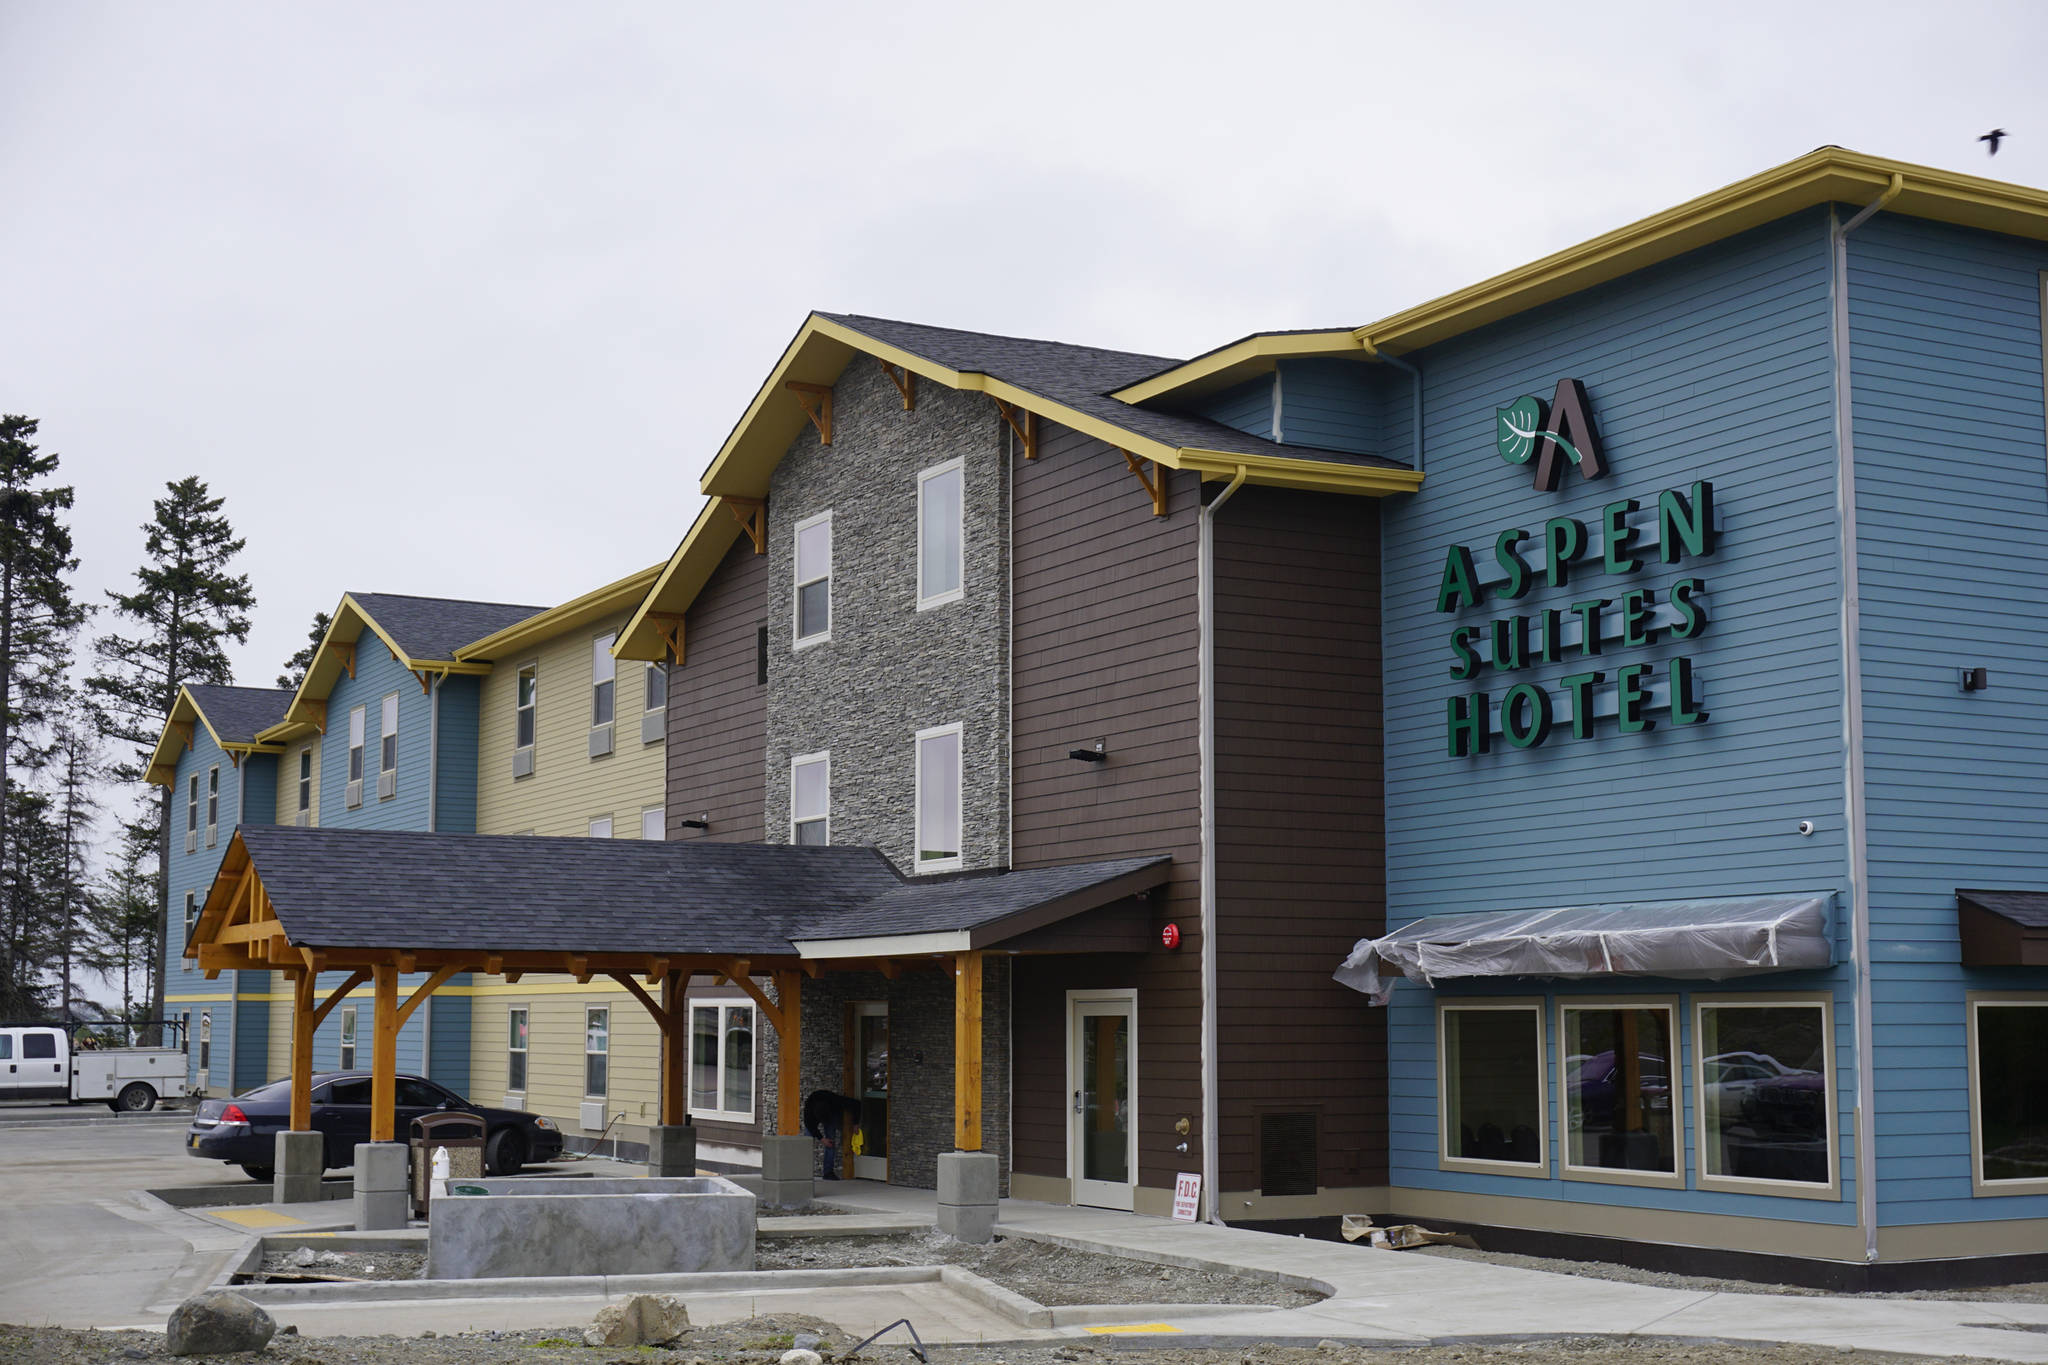 Workers finish up the new Homer Aspen Suites Hotel on May 21, 2019, in Homer, Alaska. The 72-room hotel opens on May 27. (Photo by Michael Armstrong/Homer News)